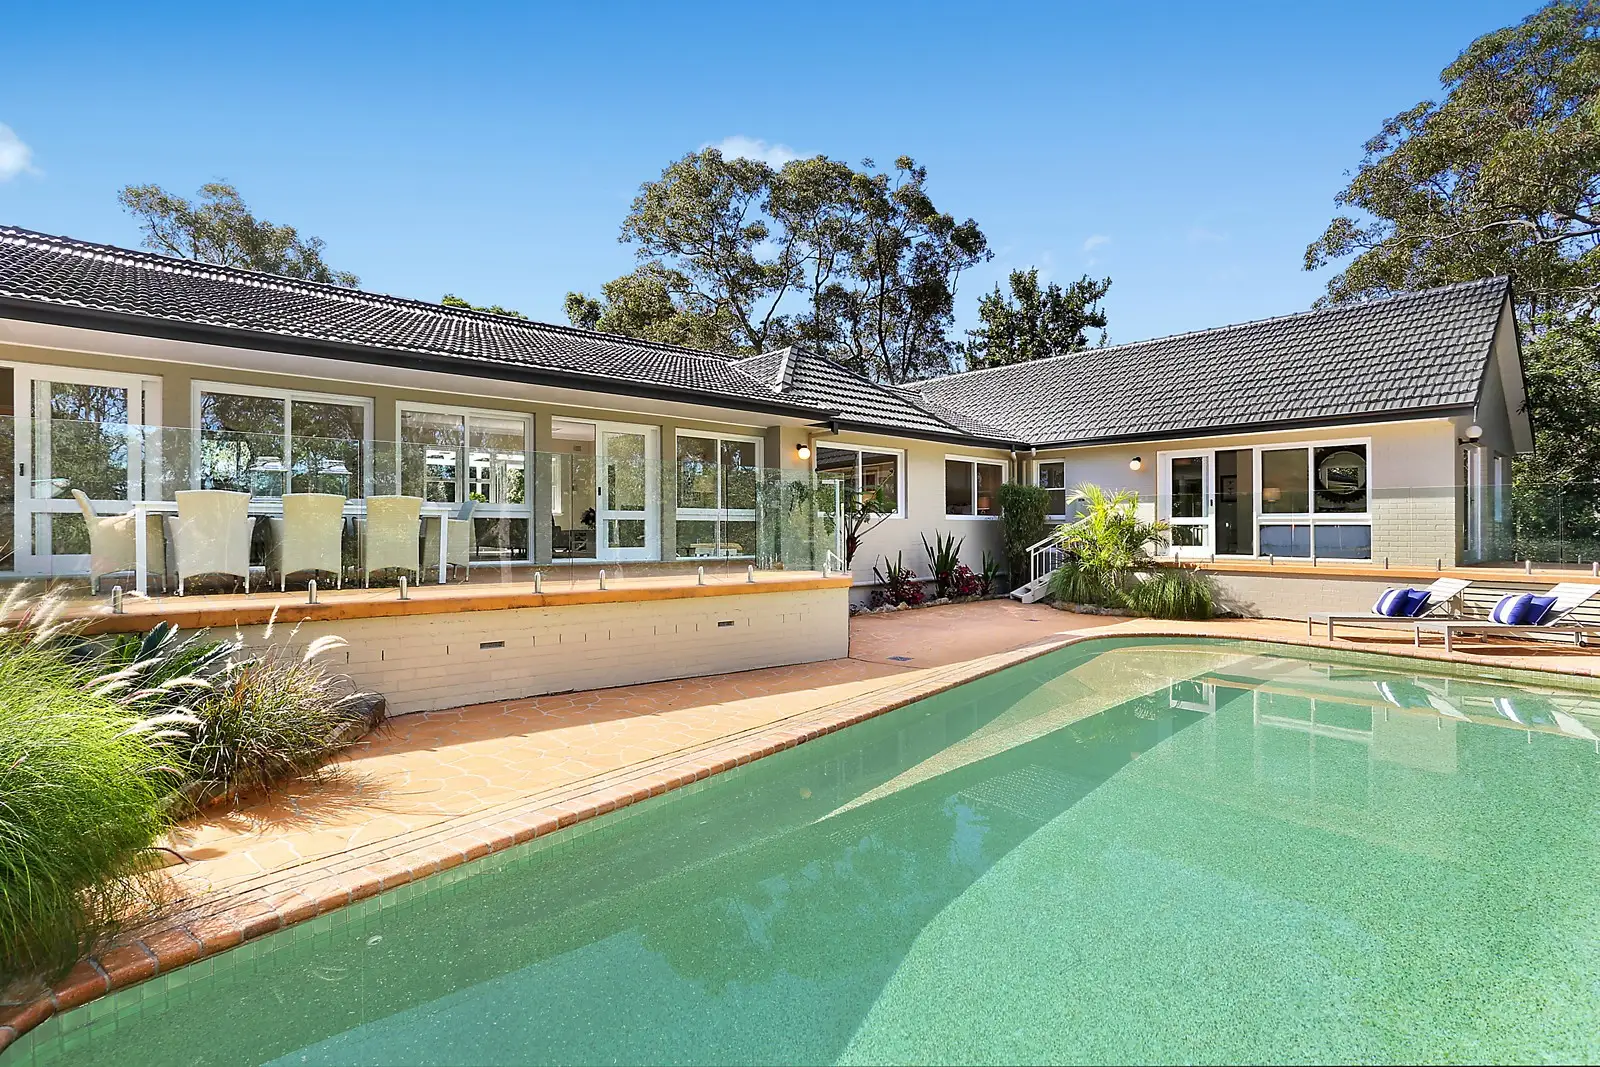 Photo #1: 98 Beechworth Road, Pymble - Sold by Sydney Sotheby's International Realty